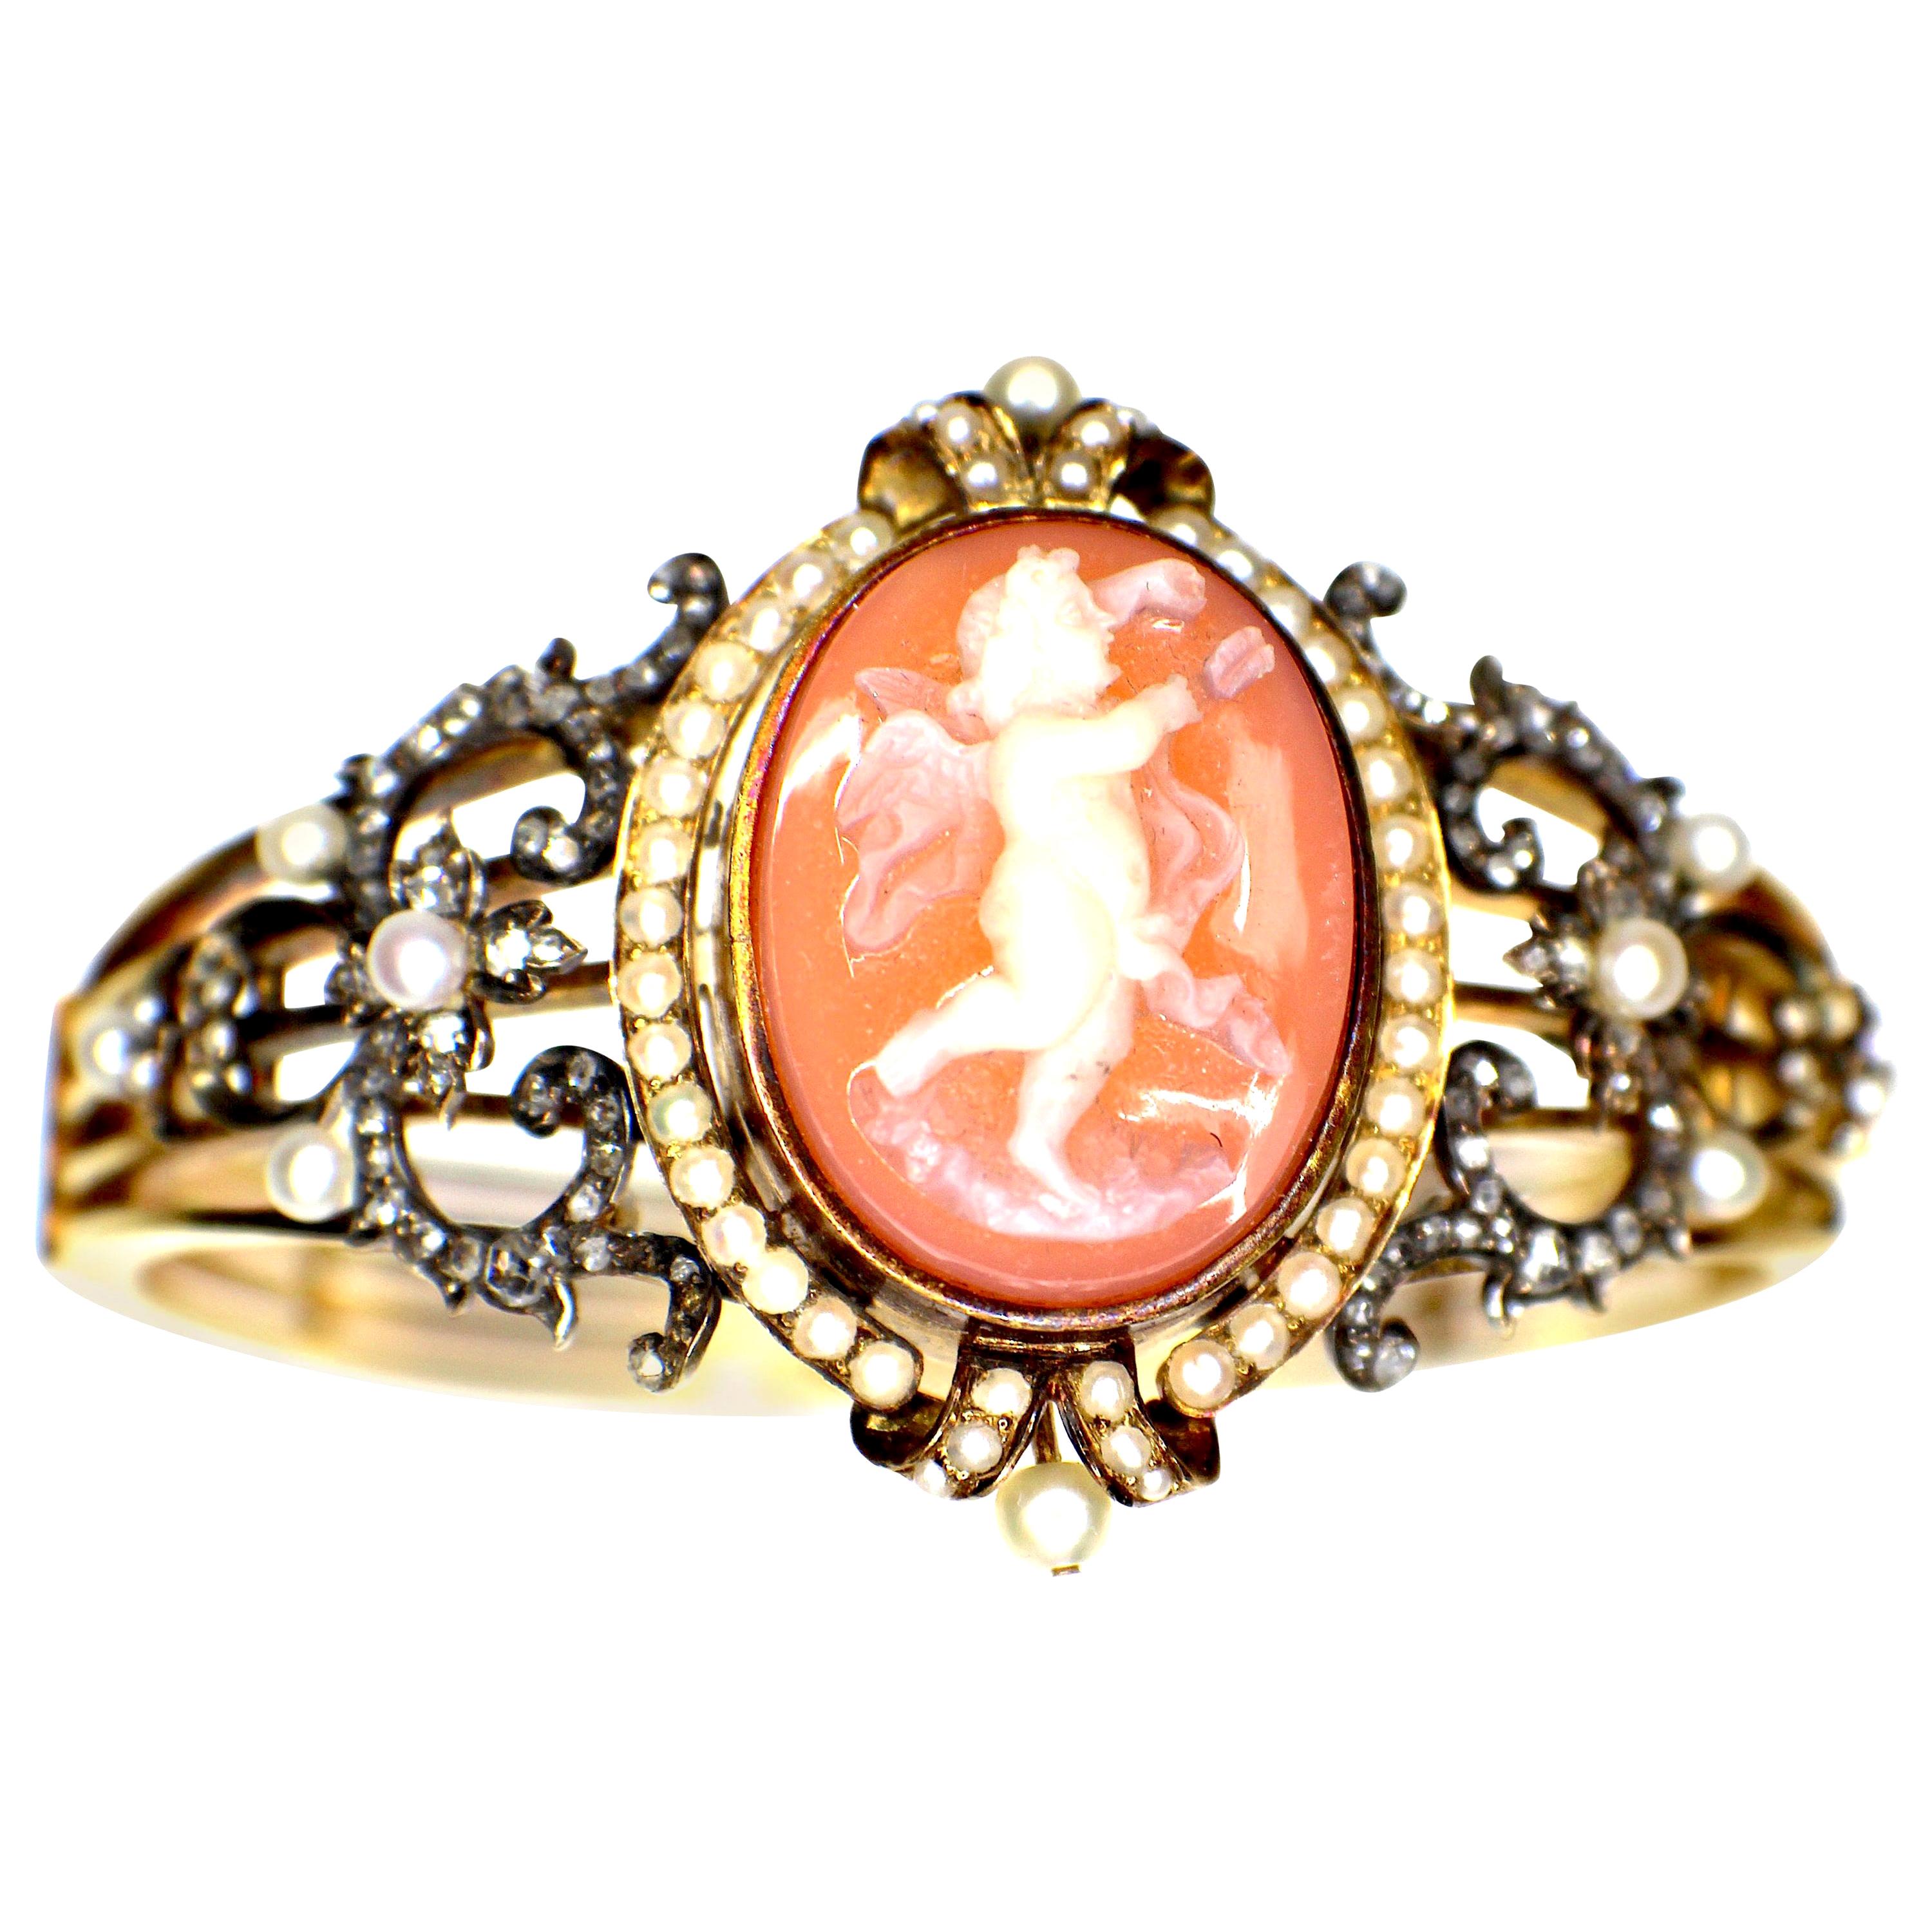 Gemolithos Beautiful Cameo Agate, Natural Pearl and Diamond Bracelet, 1880s For Sale